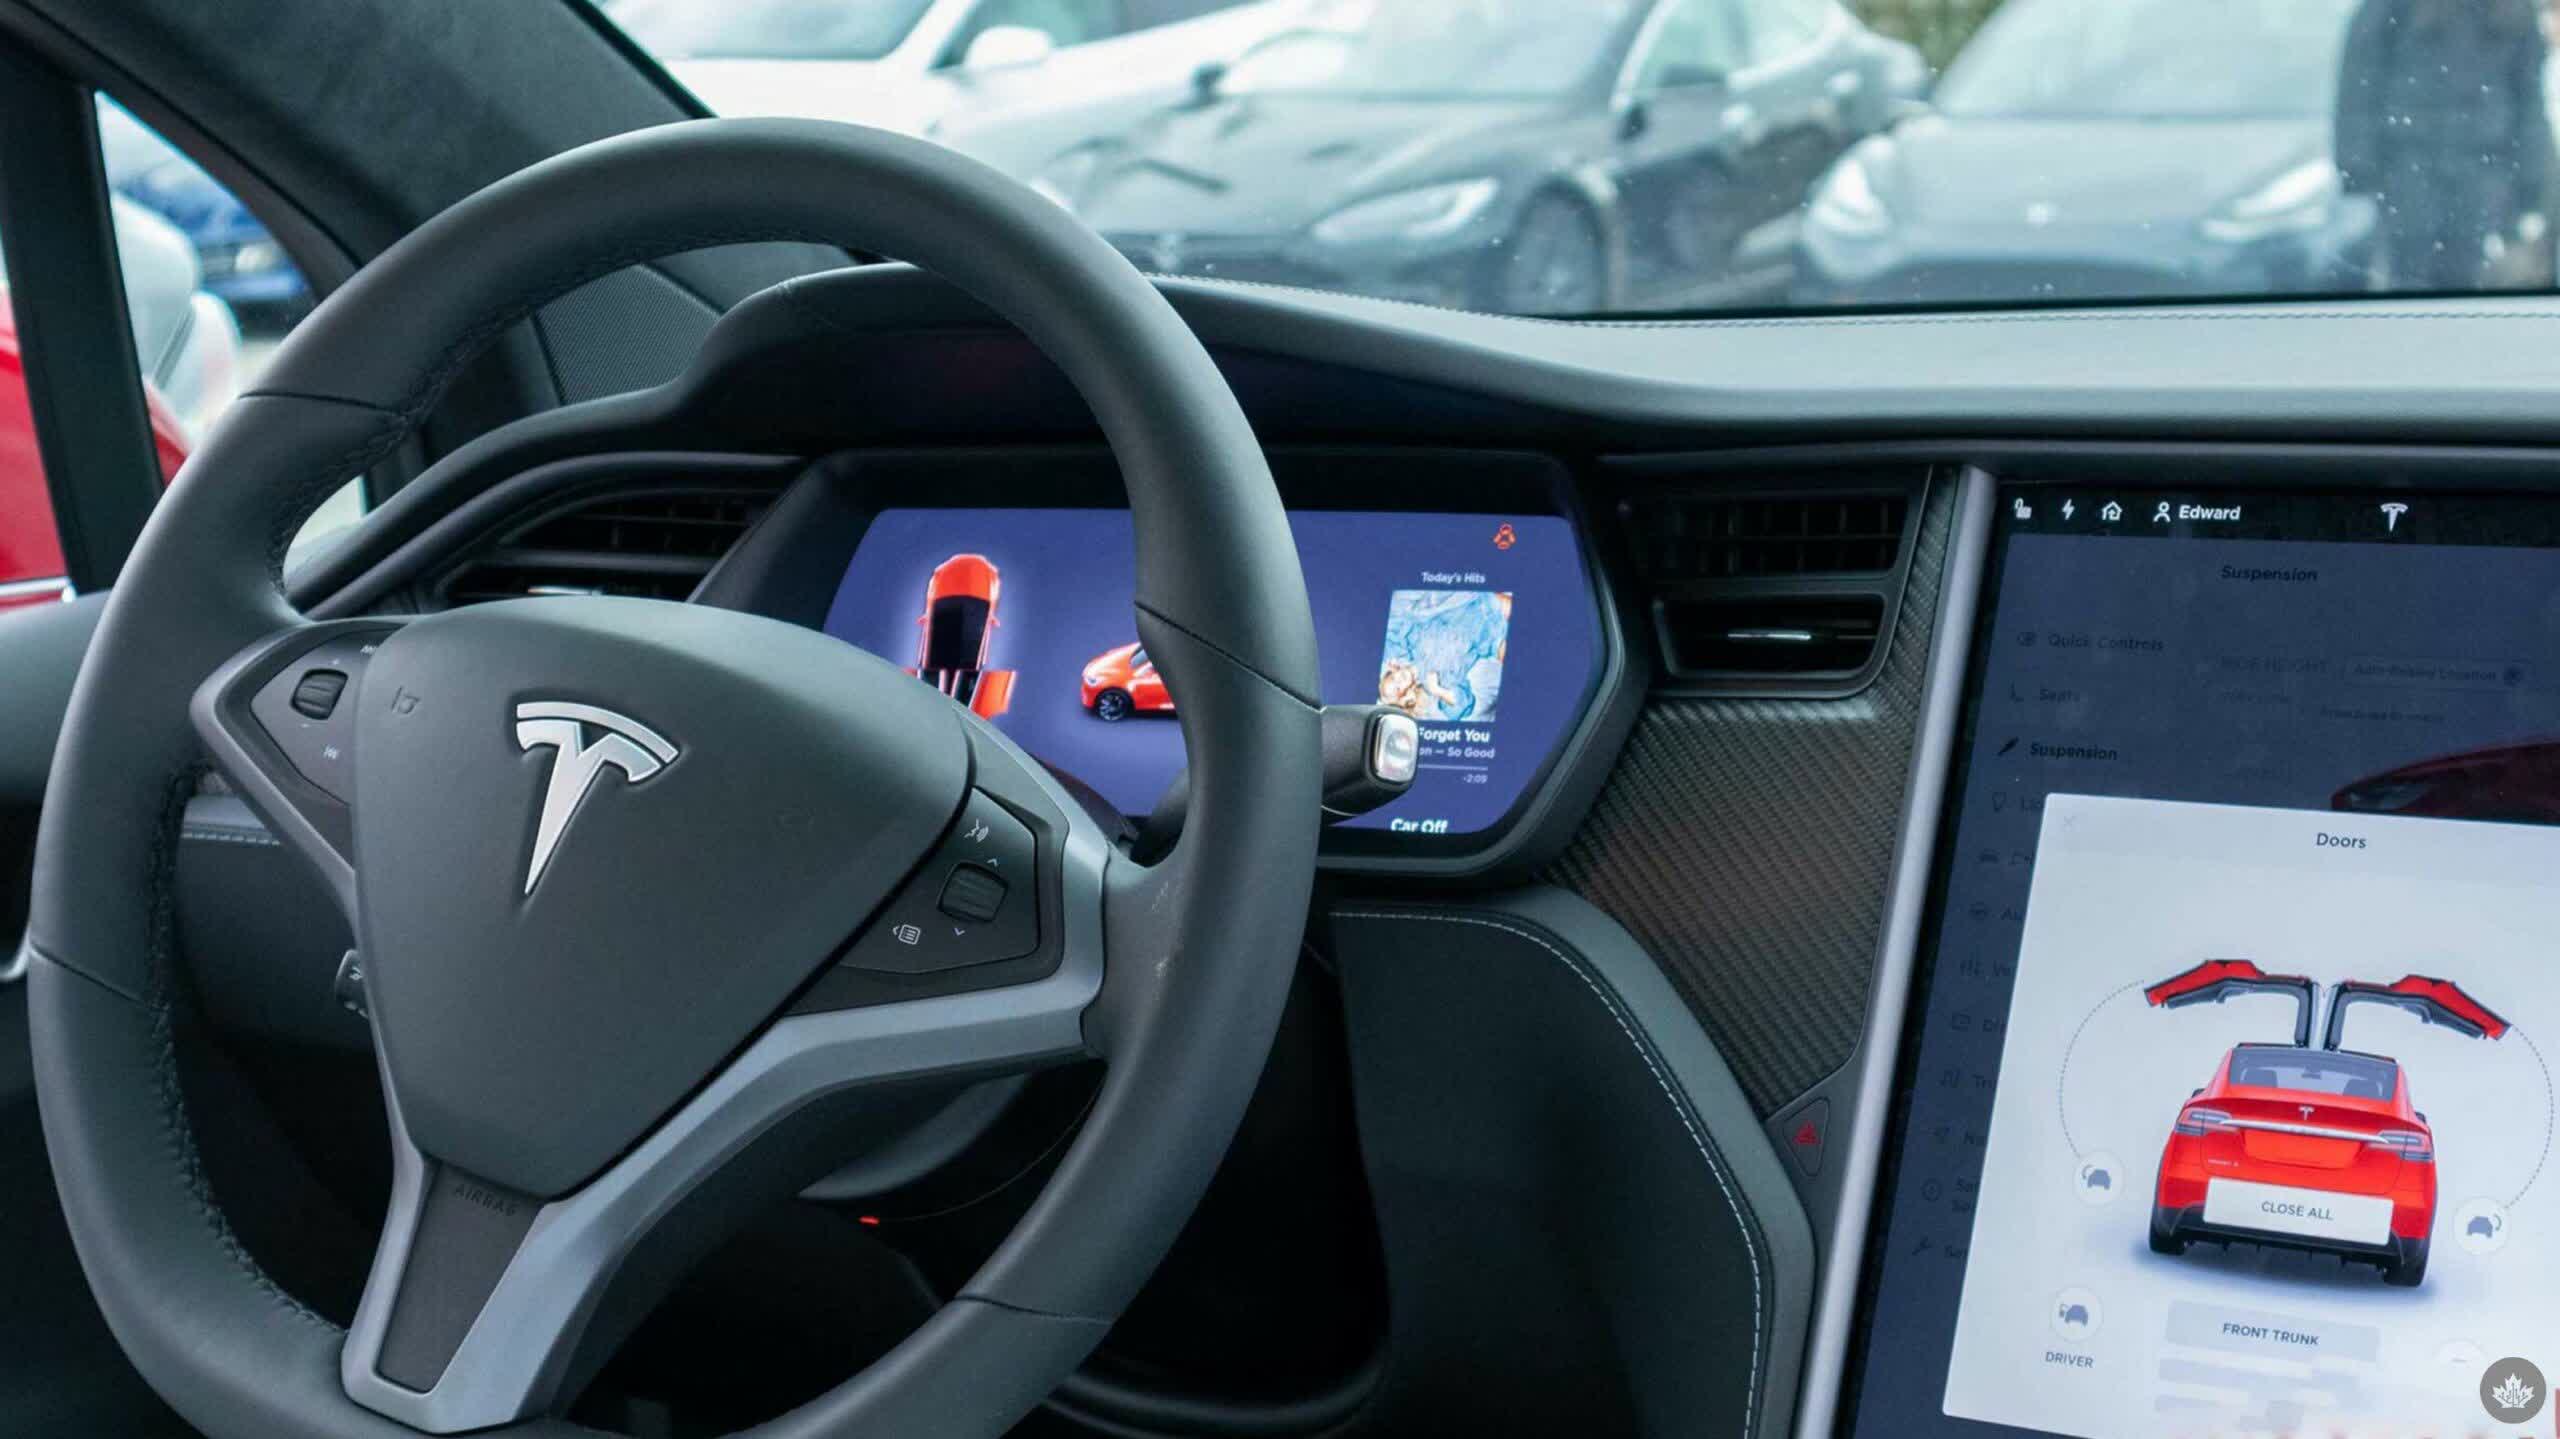 Tesla's Full Self-Driving Beta offers automated driving profiles that can perform 'rolling stops'